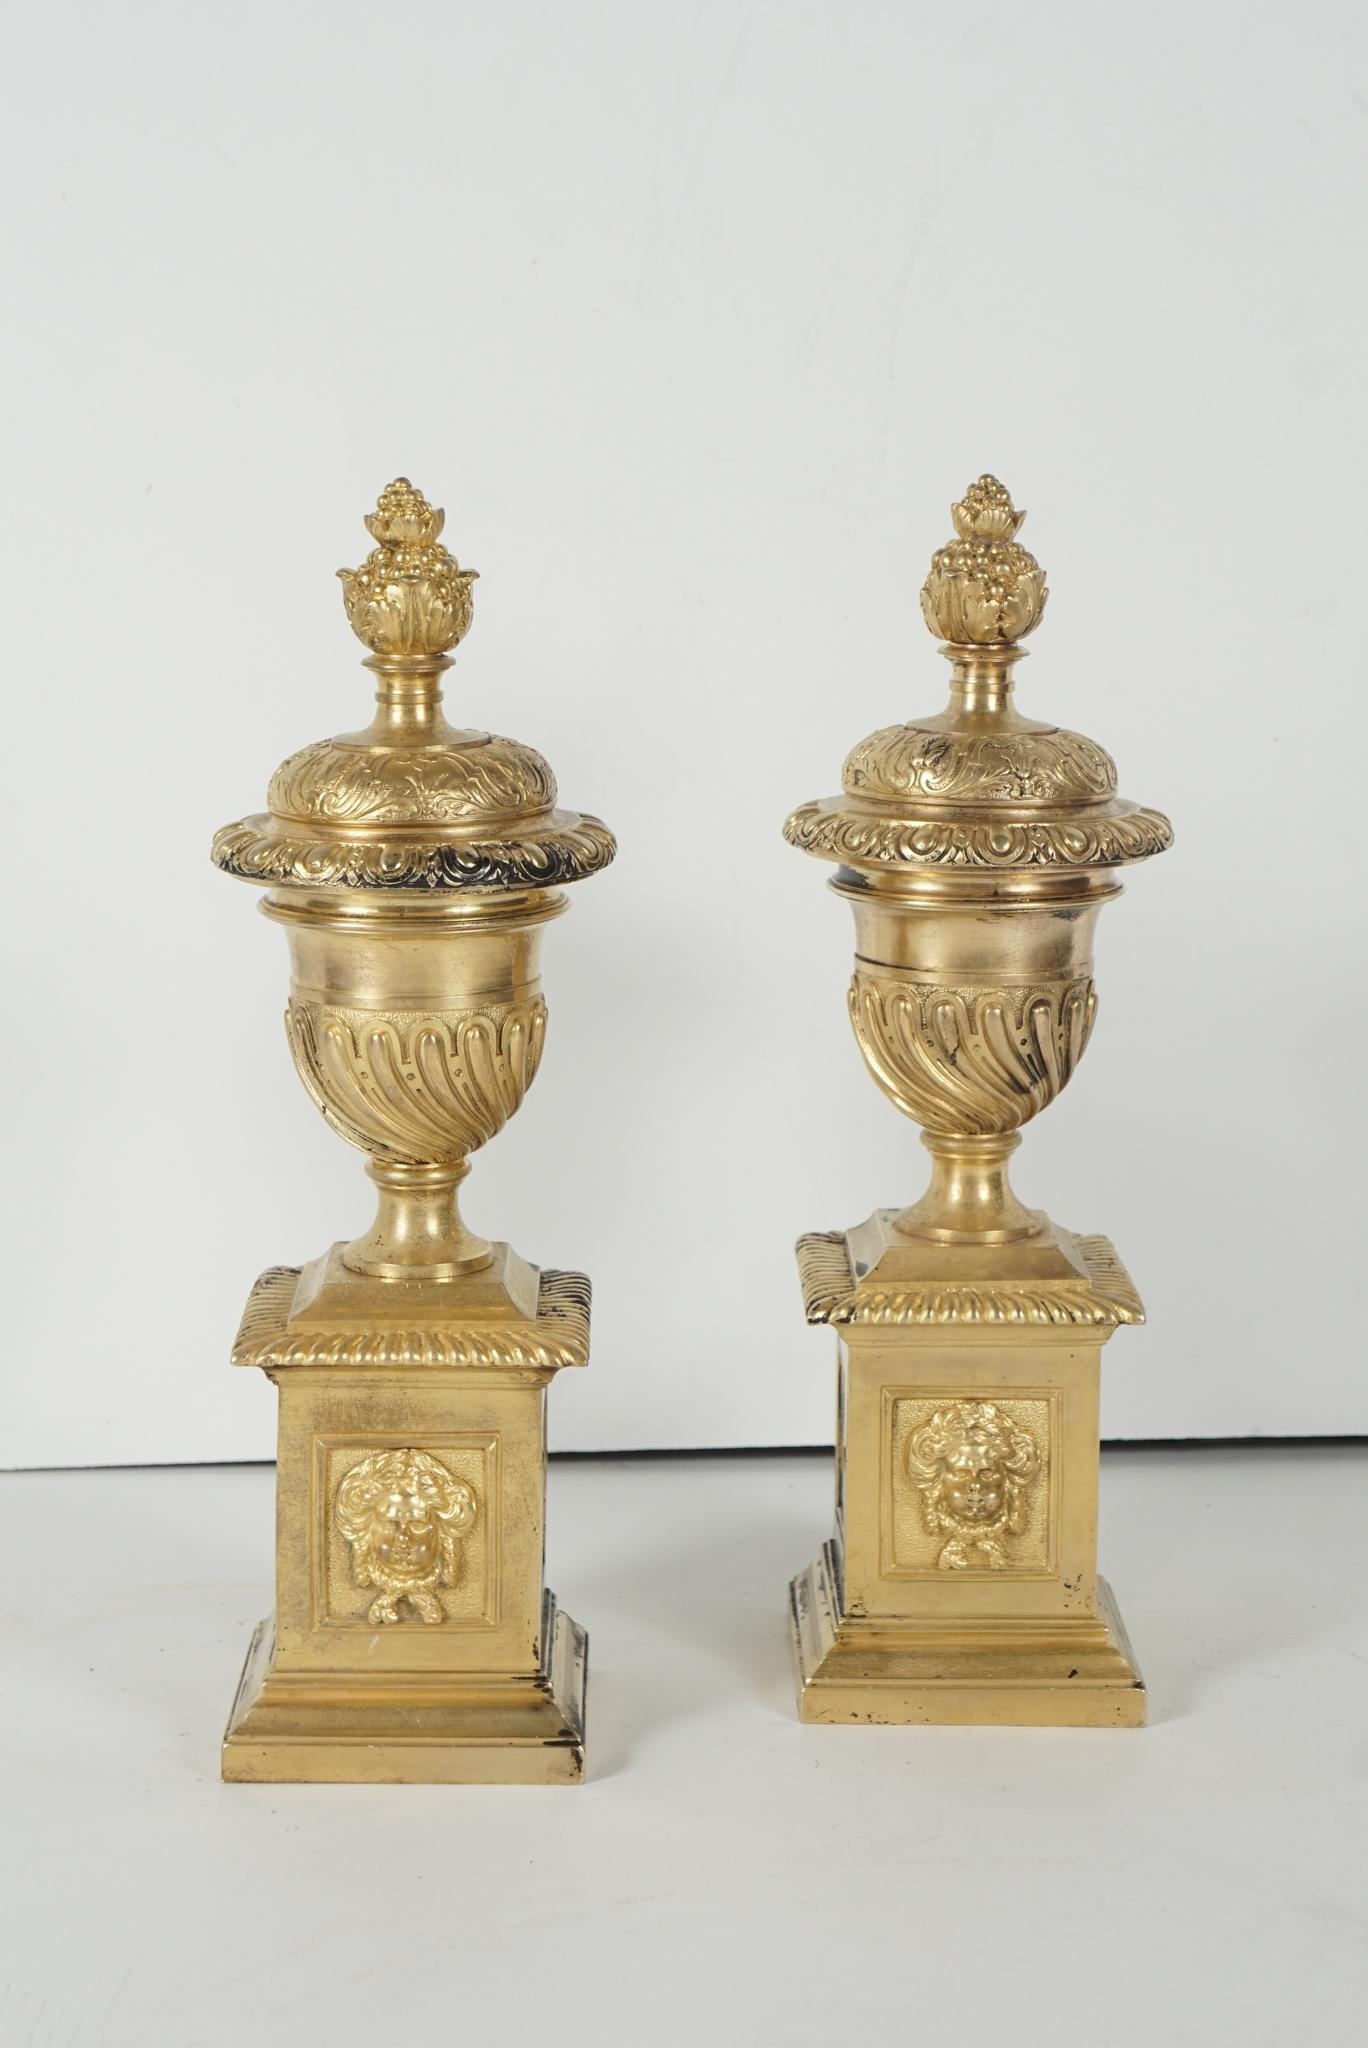 A pair of lovely small and well-cast English fire dogs, circa 1680-1700. Cast as urns resting on a raised plinth, the pair exhibit finely detailed attention in the chased raised decorative borders of historical patterns found in antiquity and